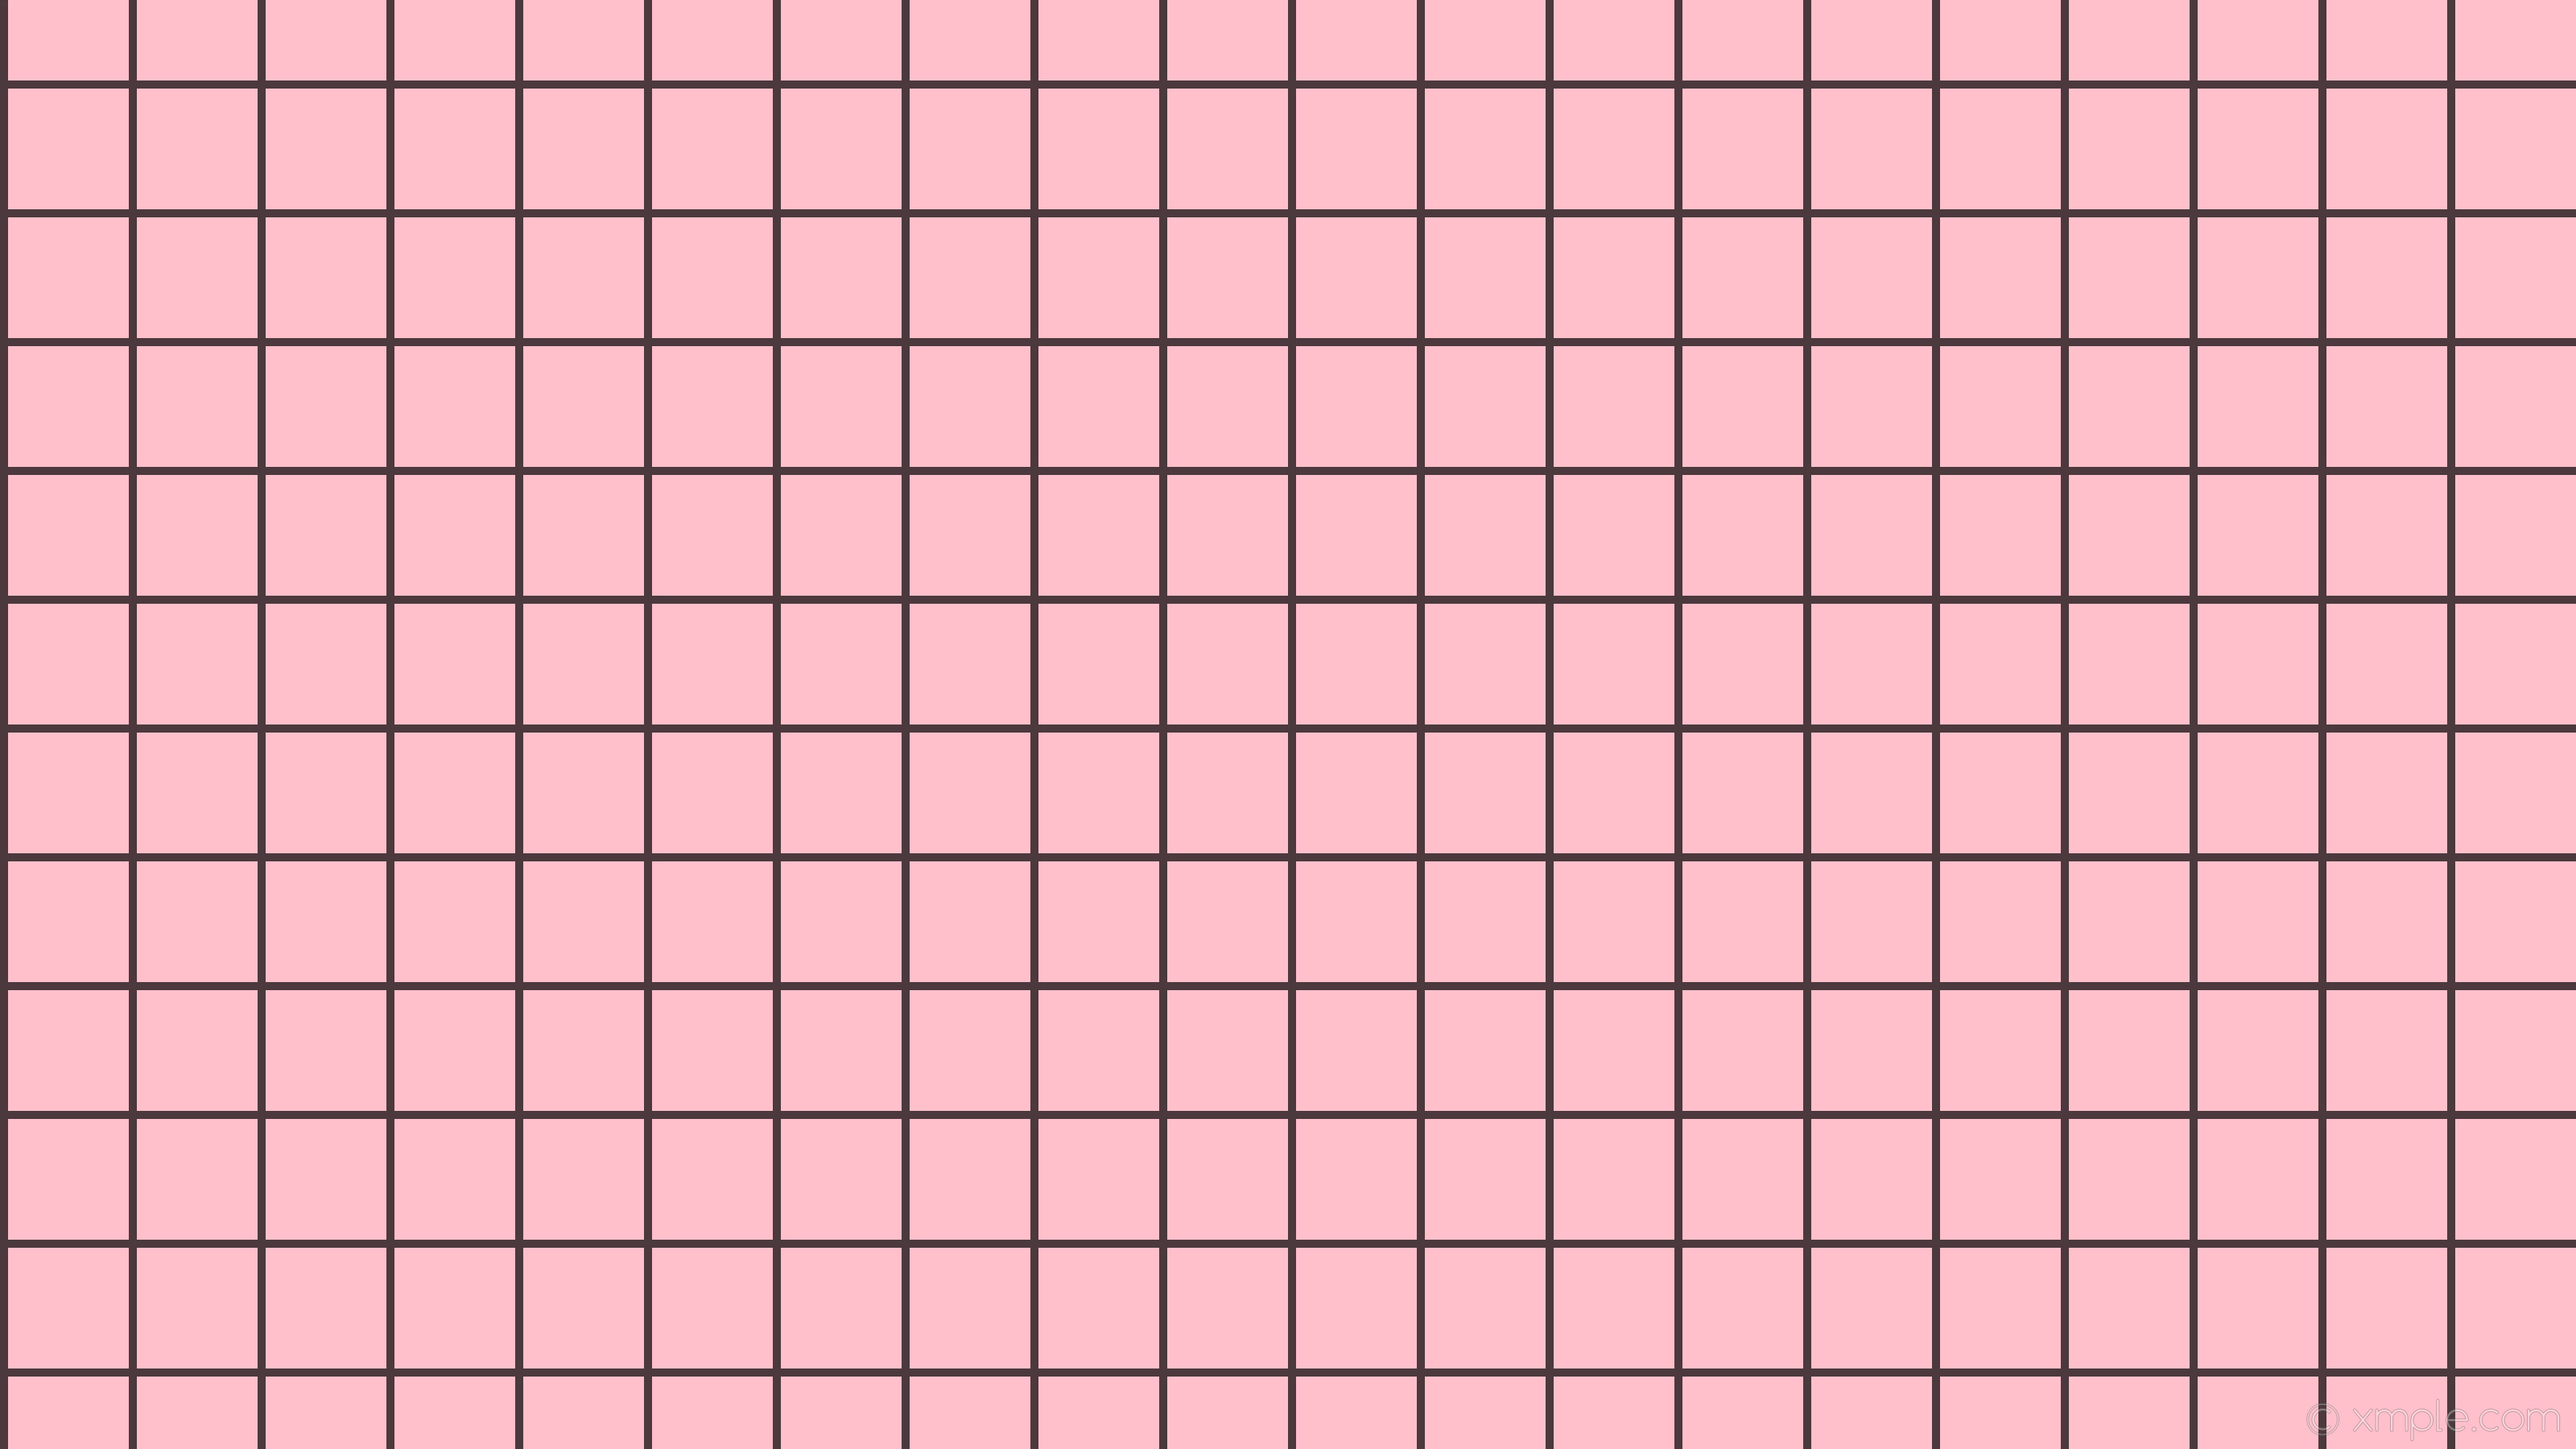 wallpaper pink graph paper purple grid ffb6c1 e6e6fa 0 on pink grid wallpapers